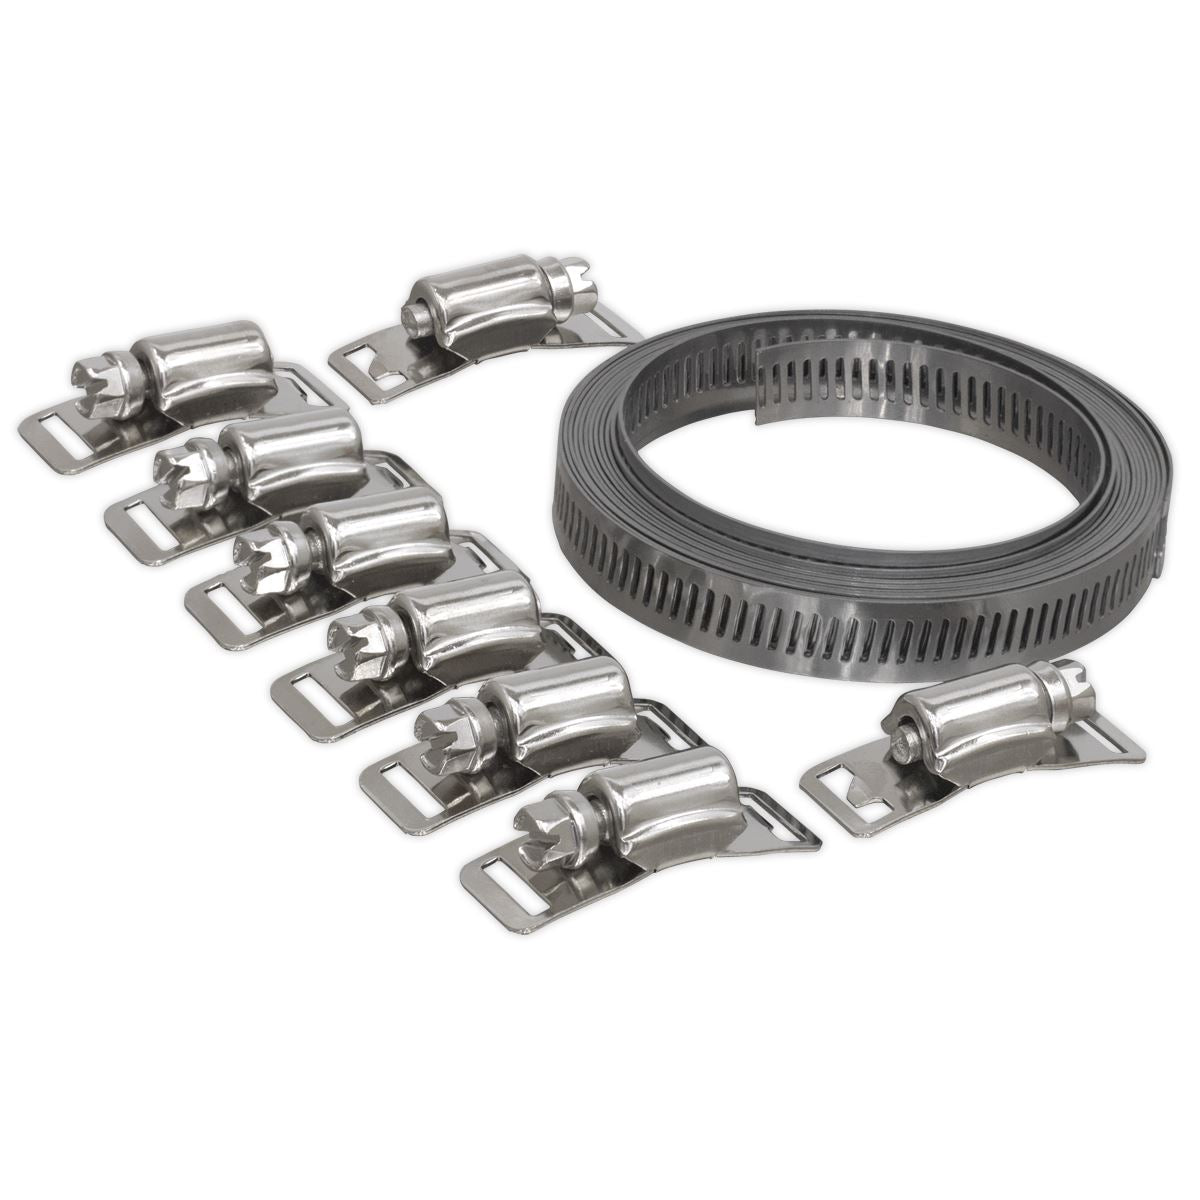 Sealey Hose Clamp Set Self Build 12.7mm Band Width with 8 Tension Clamps